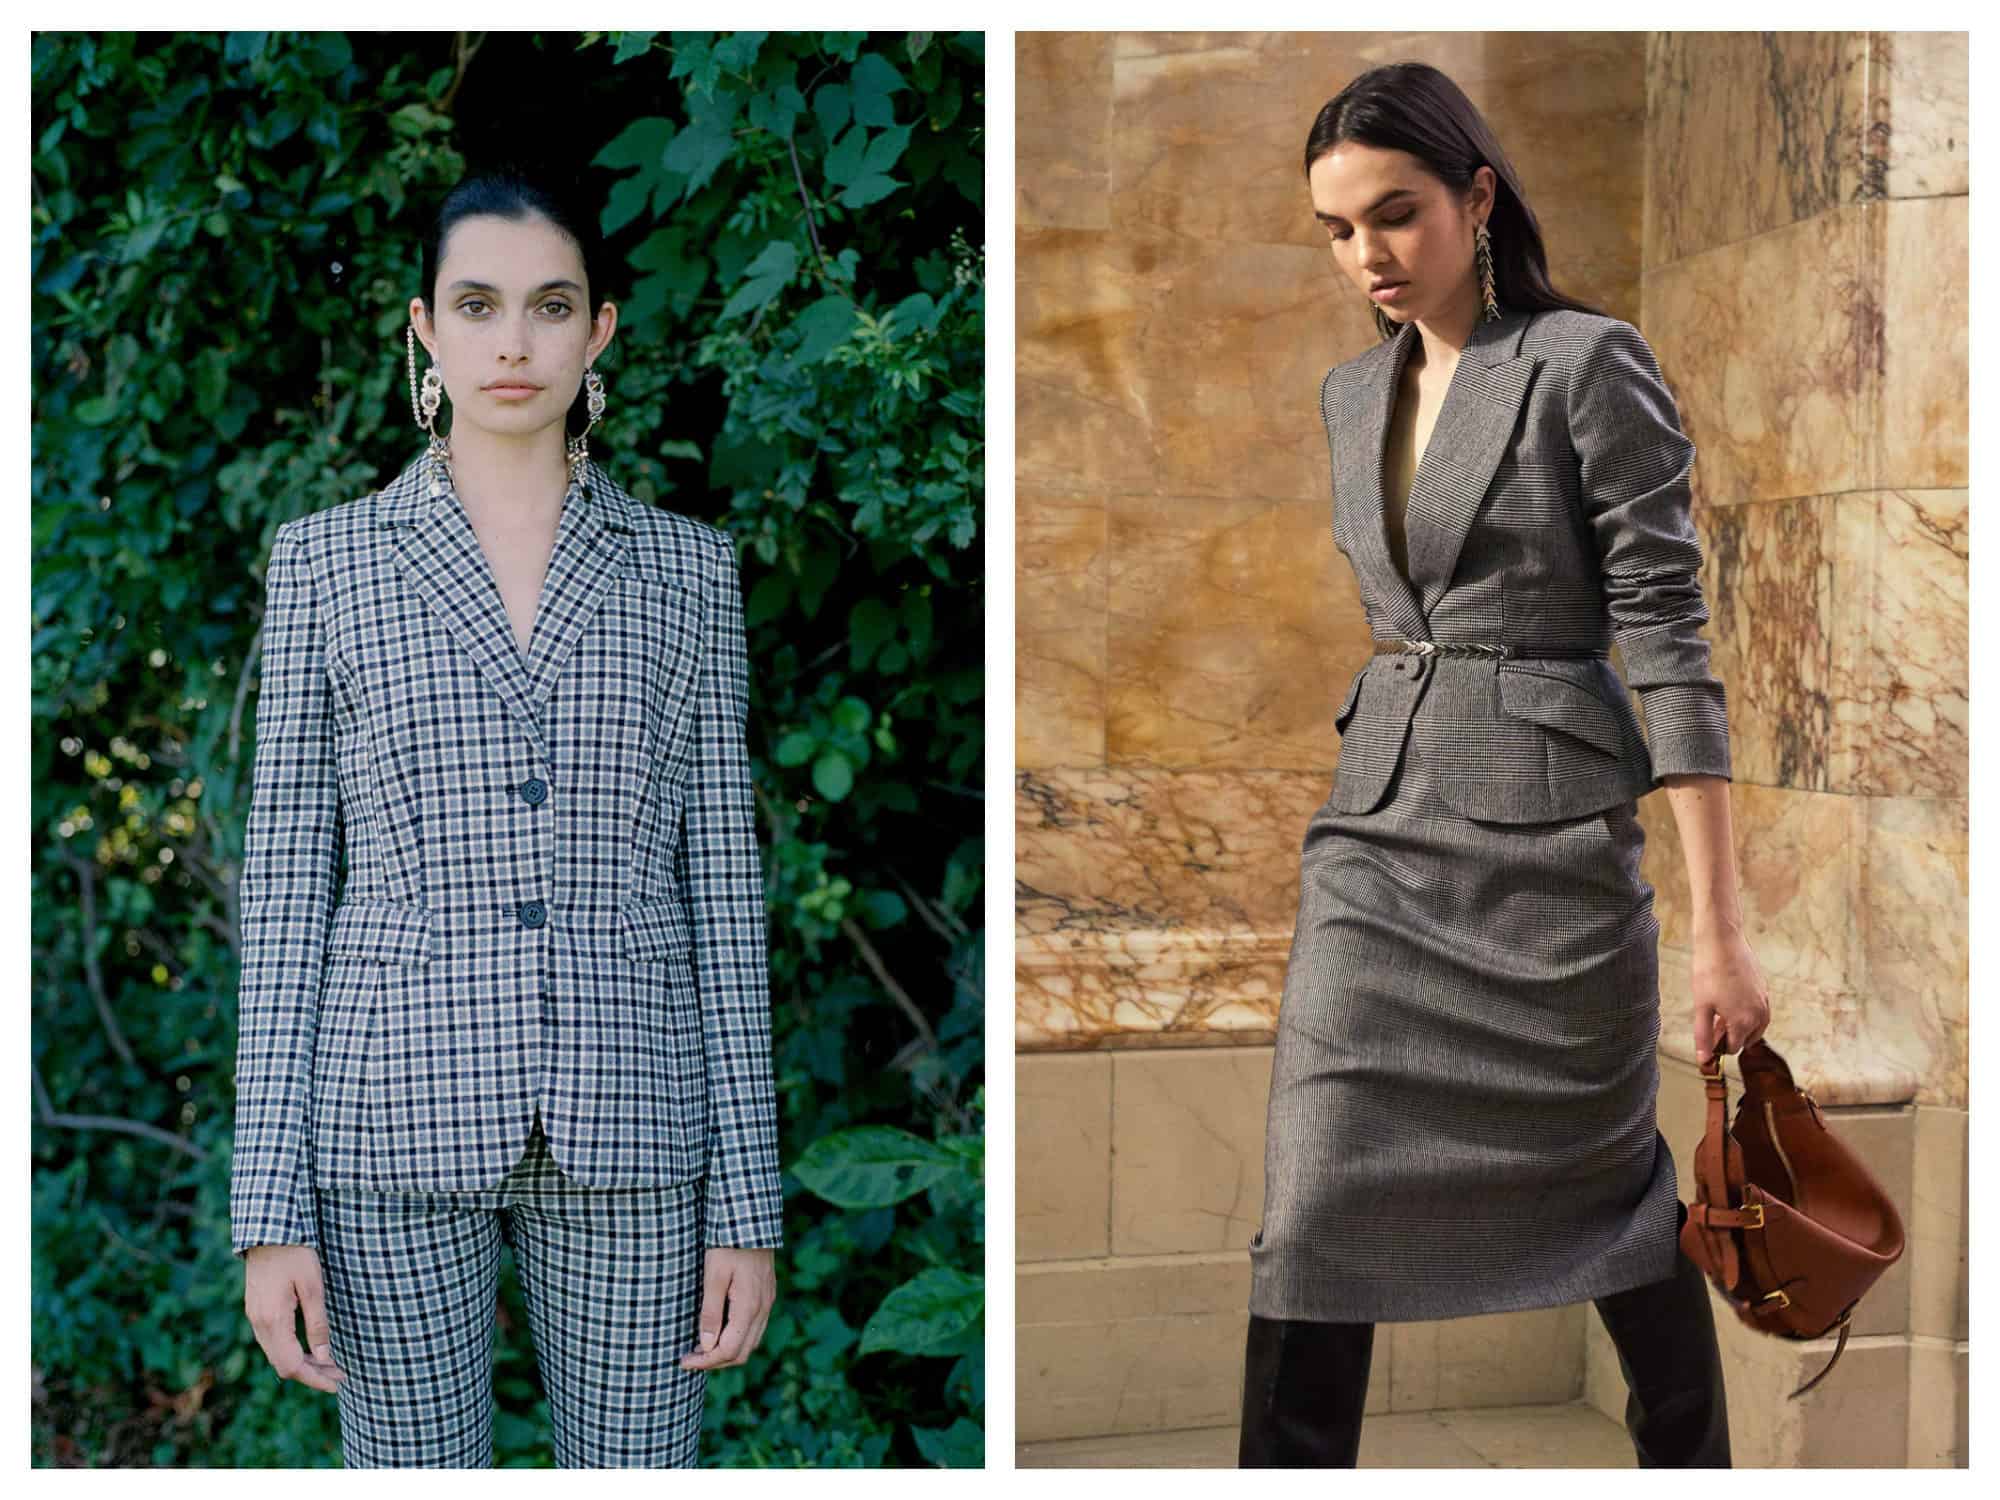 Chequered suits (left) and blazer-and-skirts (right) are this winter's fashion trend from Paris Fashion Week.